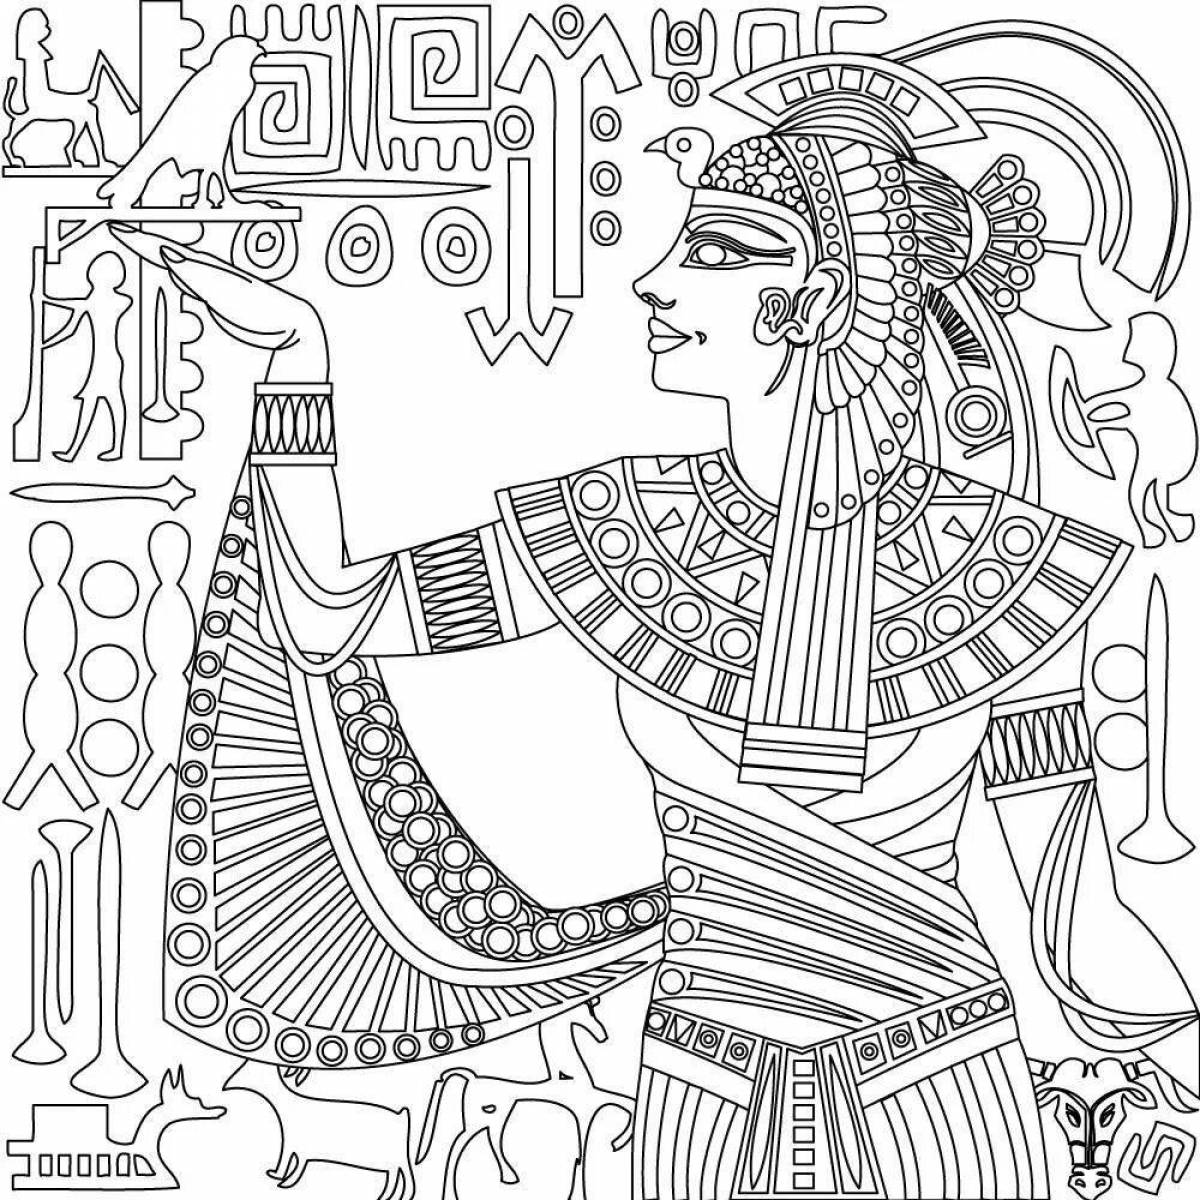 Fantastic egyptian coloring book for kids